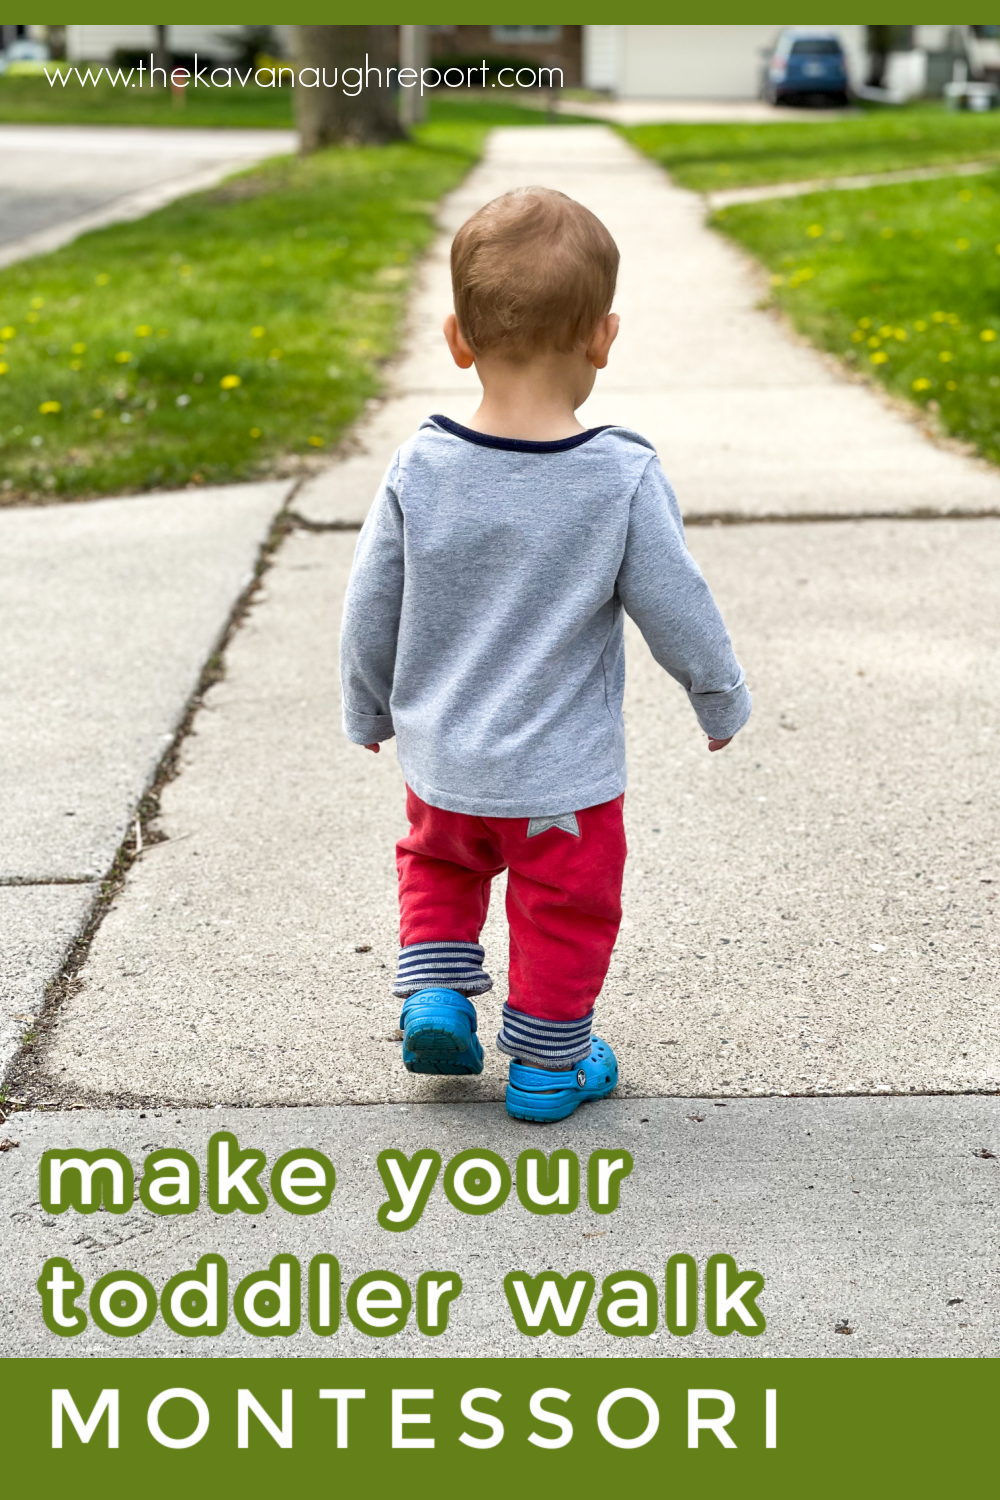 Montessori tips for walking with a 1-year-old. This fun, easy activity is perfect for getting outside with your toddler.